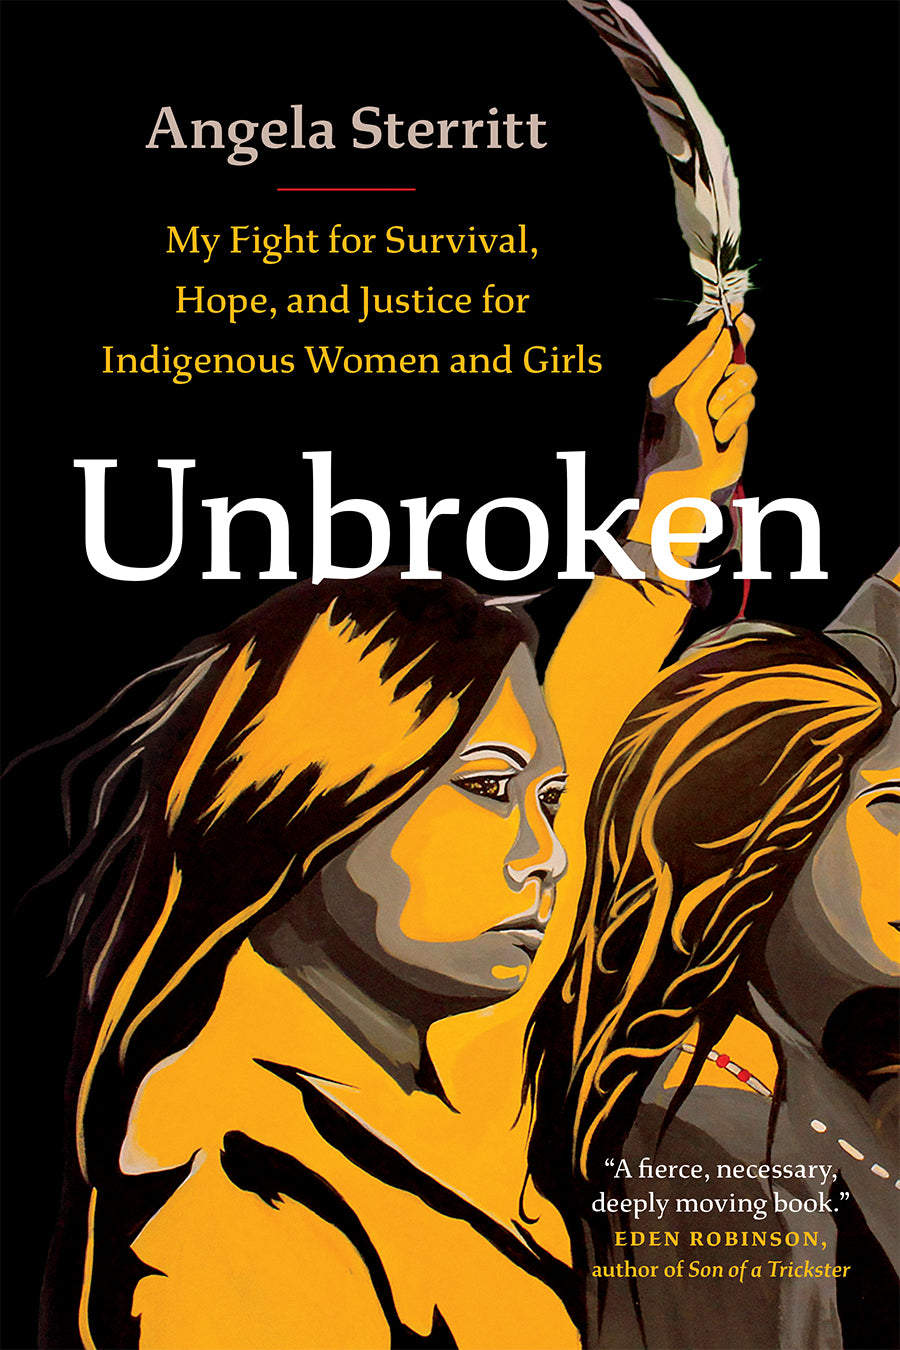 Unbroken: My fight for survival, jope, and justice for Indigenous women and girls